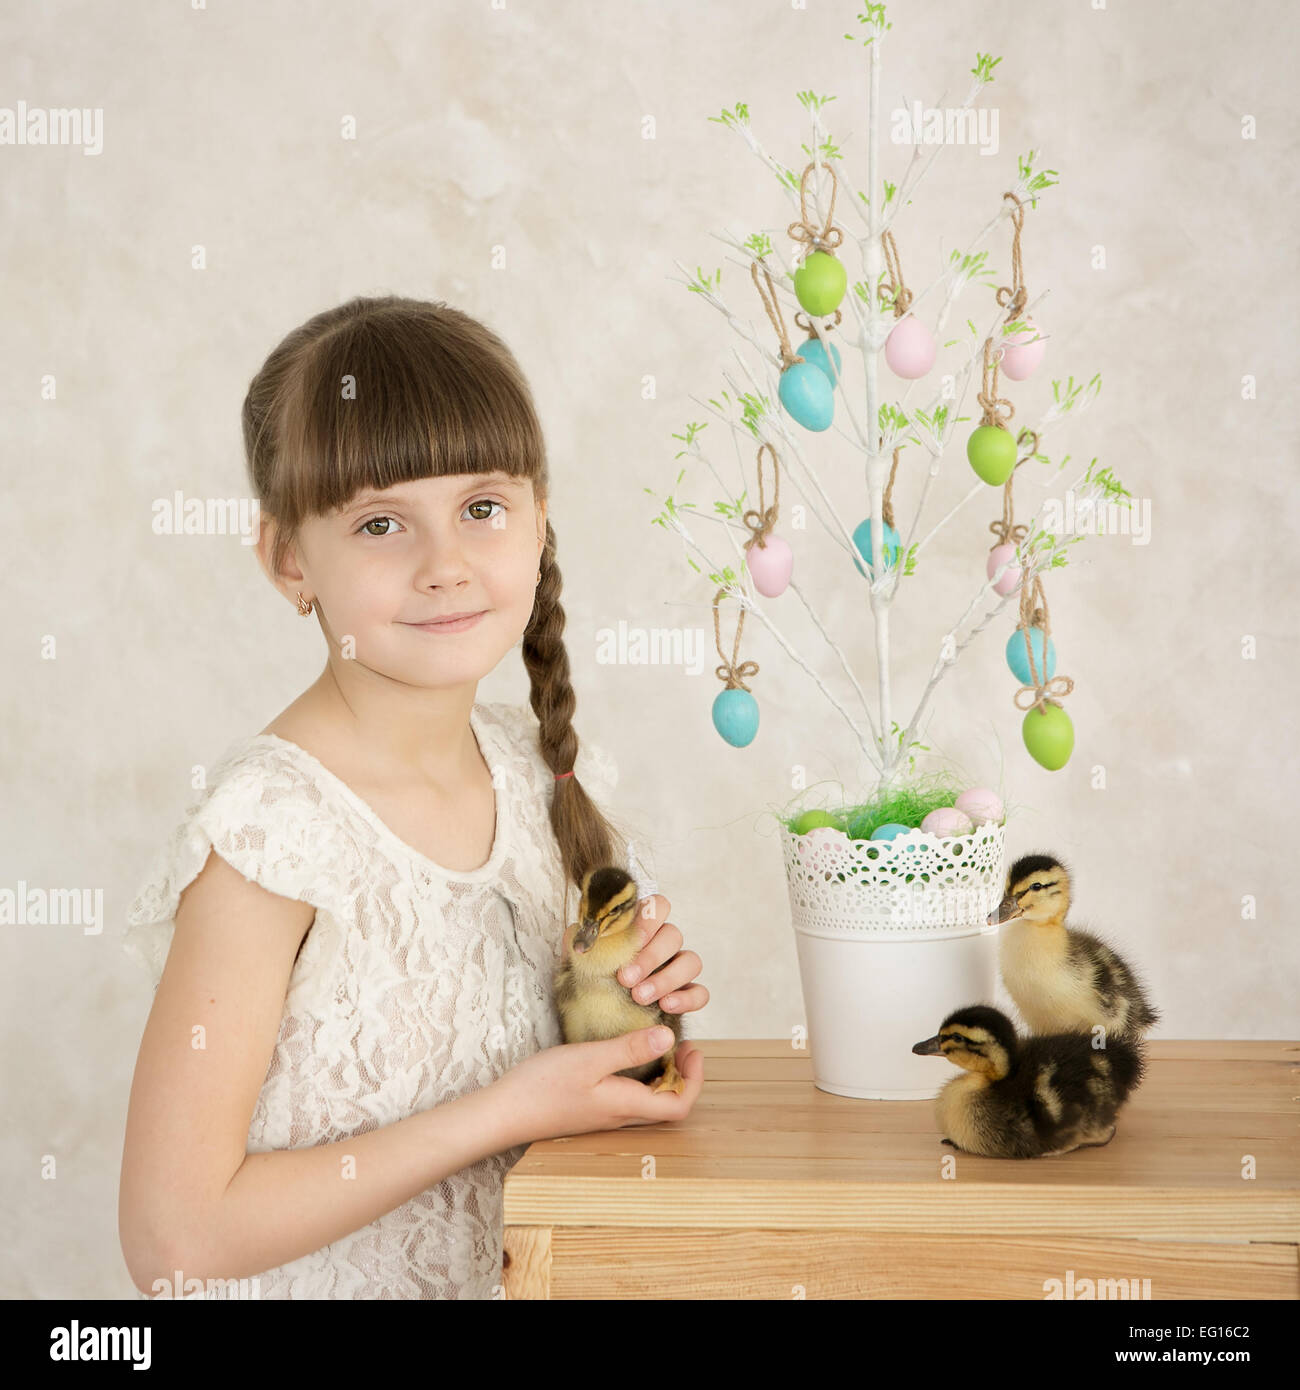 Portrait of a beautiful girl Easter decor Stock Photo